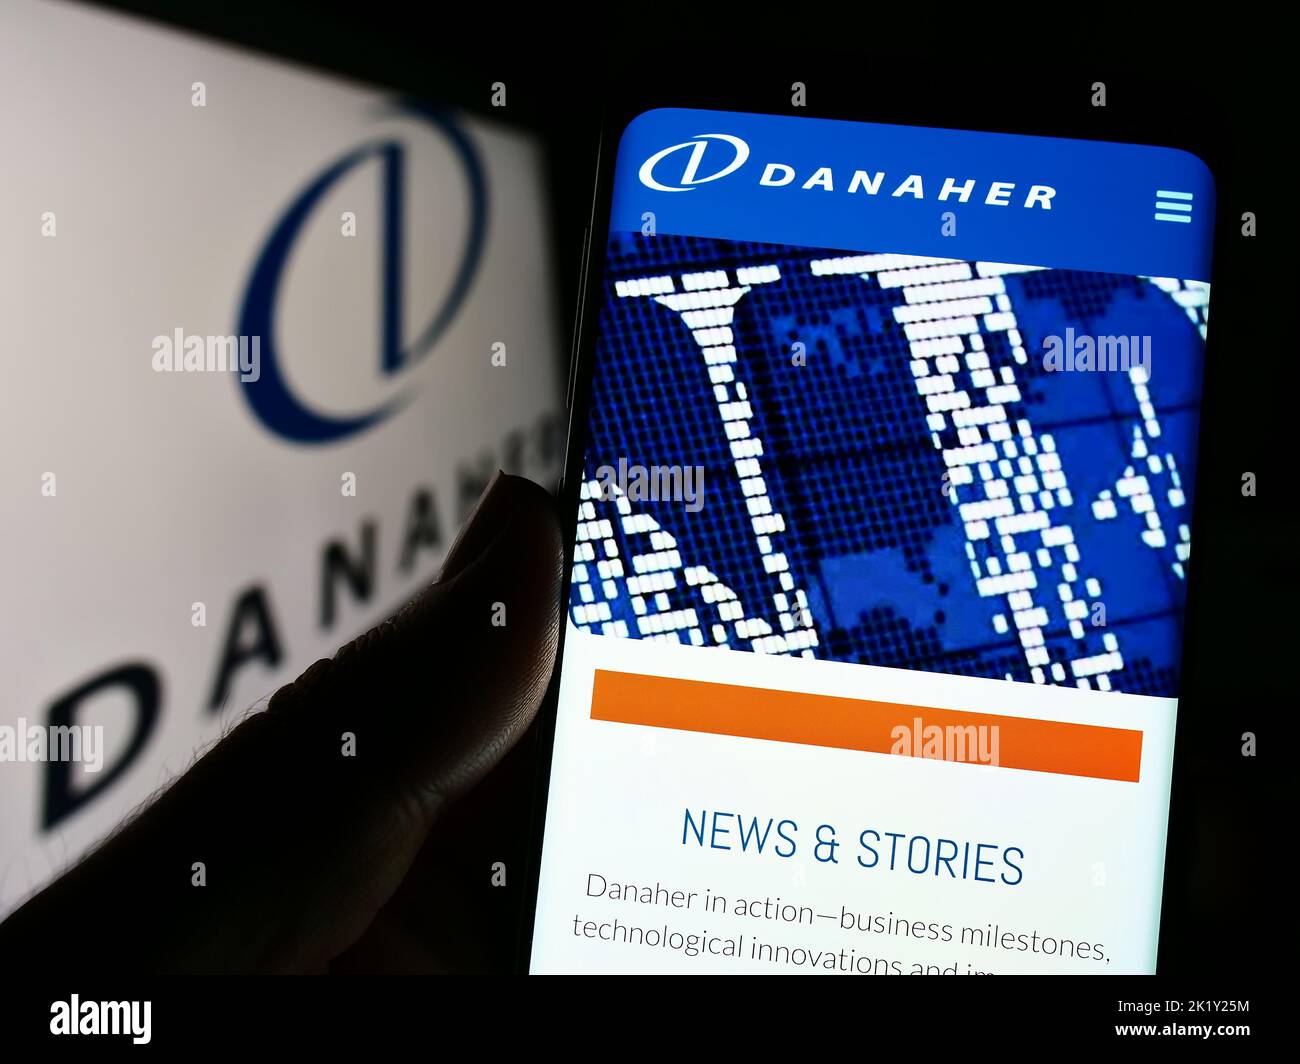 Person holding smartphone with website of US conglomerate Danaher Corporation on screen in front of logo. Focus on center of phone display. Stock Photo